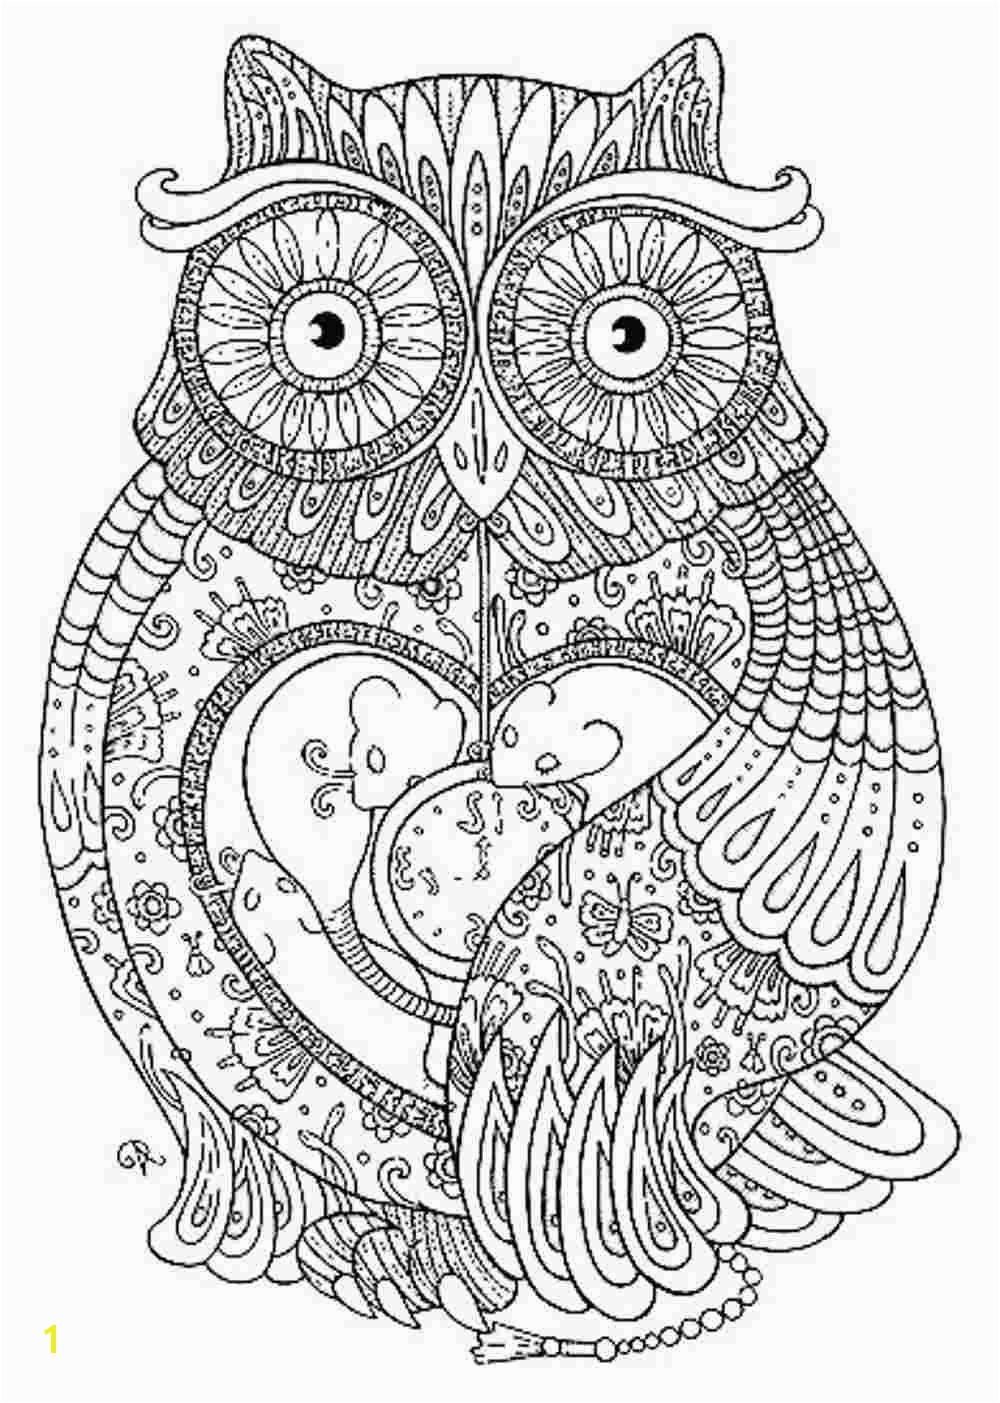 Mandala Coloring Pages Of Animals Animal Mandala Coloring Pages to and Print for Free